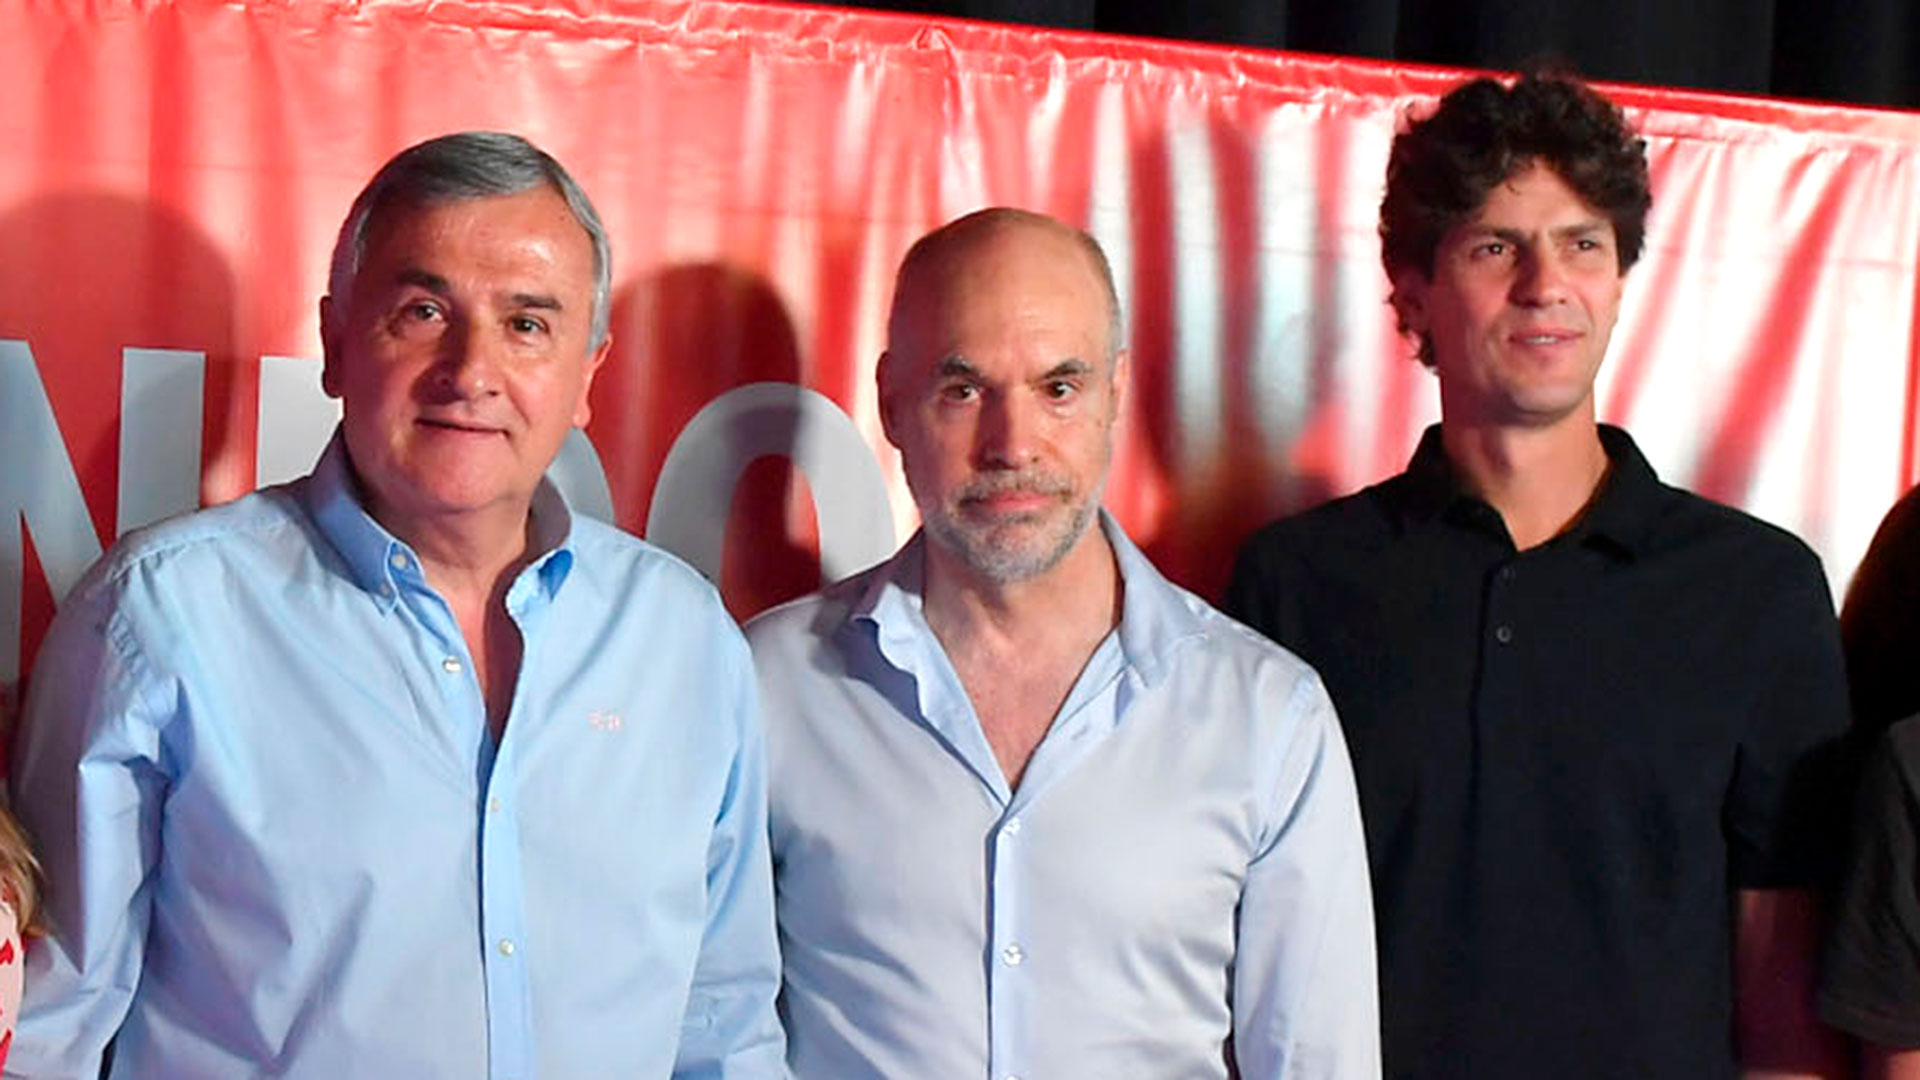 Unity sign.  Gerardo Morales, Horacio Rodríguez Larreta and Martín Lousteau coincide in the act of the UCR for the 39th anniversary of the return to democracy.  (Maximilian Moon)